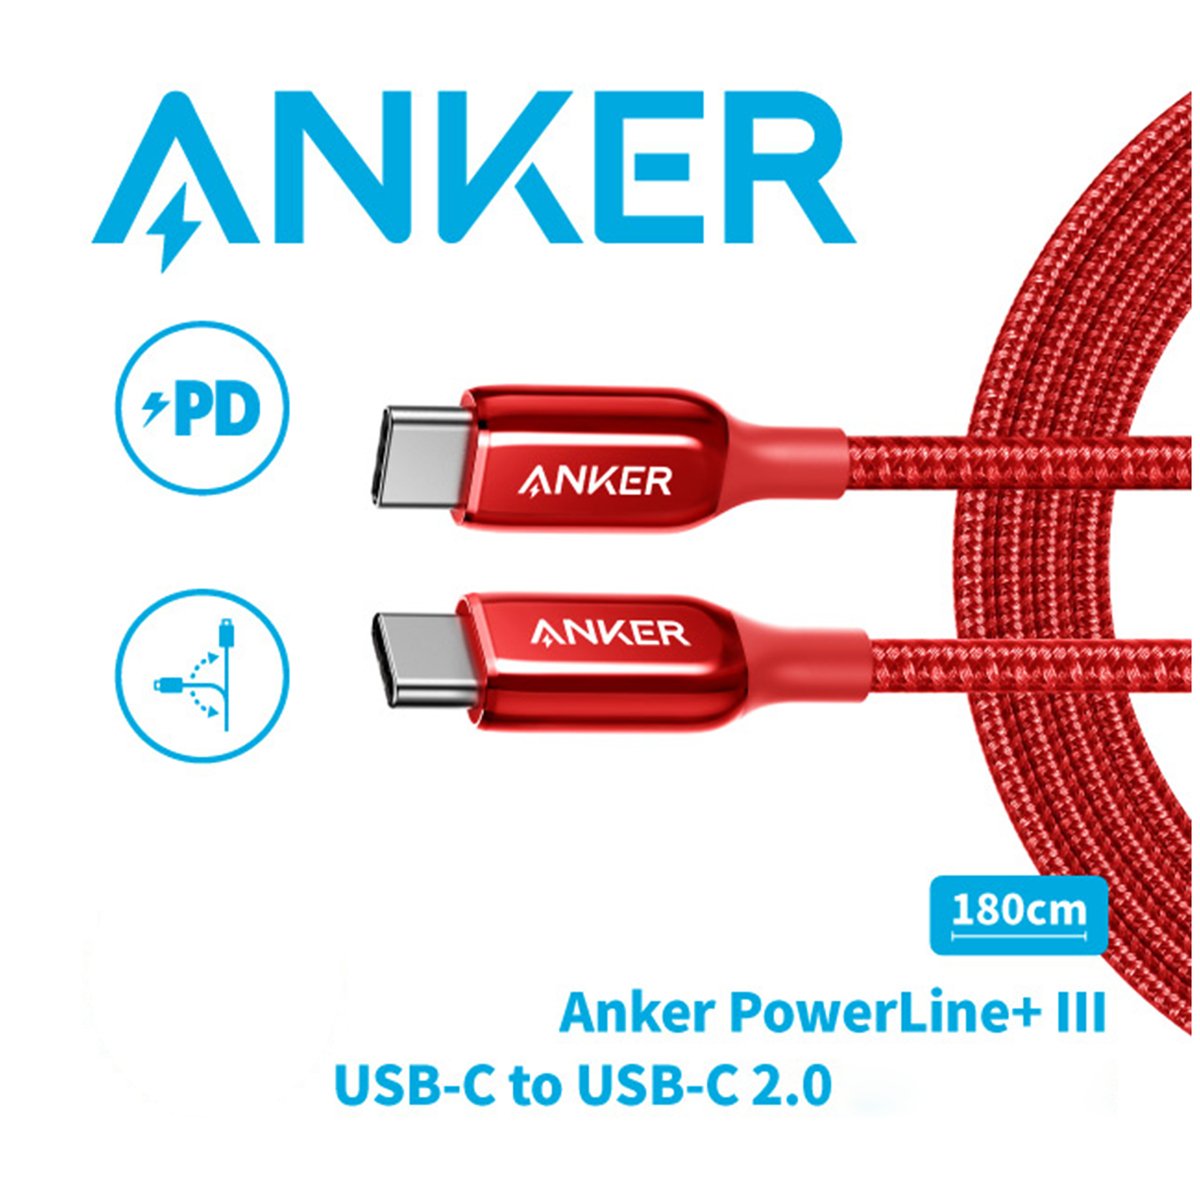 Anker PowerLine+ III USB-C to USB-C Cable A8862H91 Red 0.9mtr